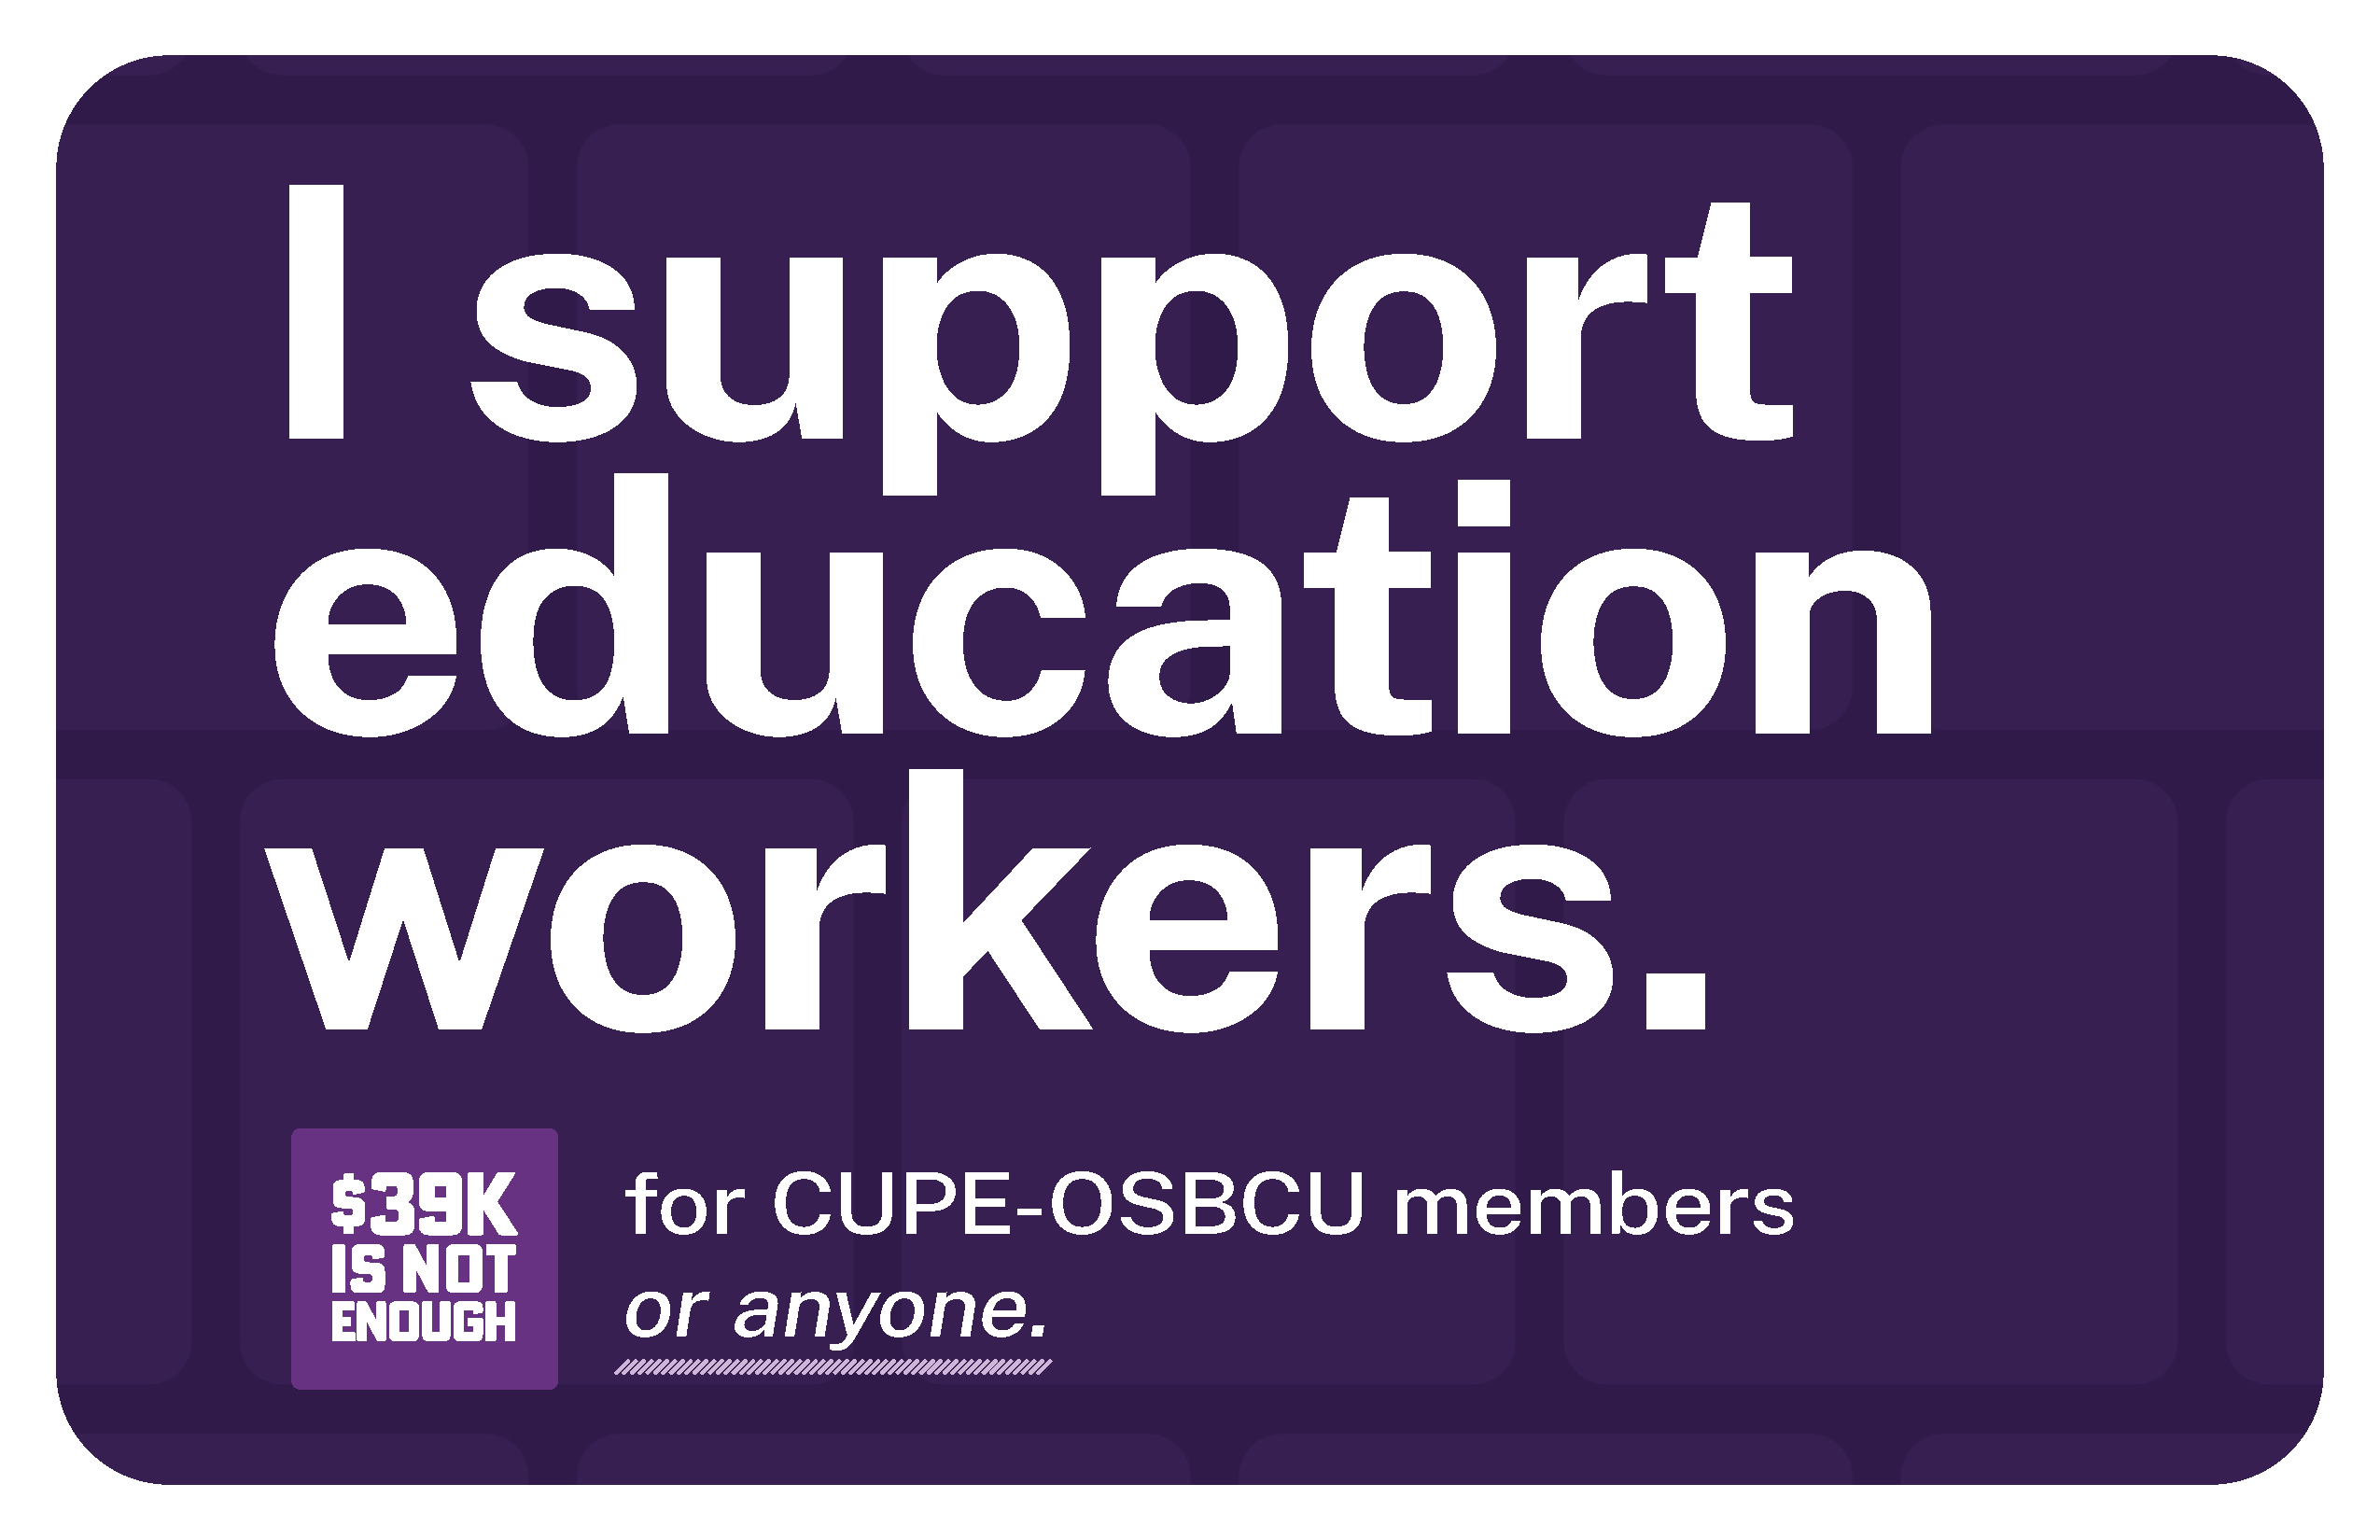 Graphic text reads: "I support education workers. 39K is not enough for CUPE-O-S-B-C-U members or anyone."